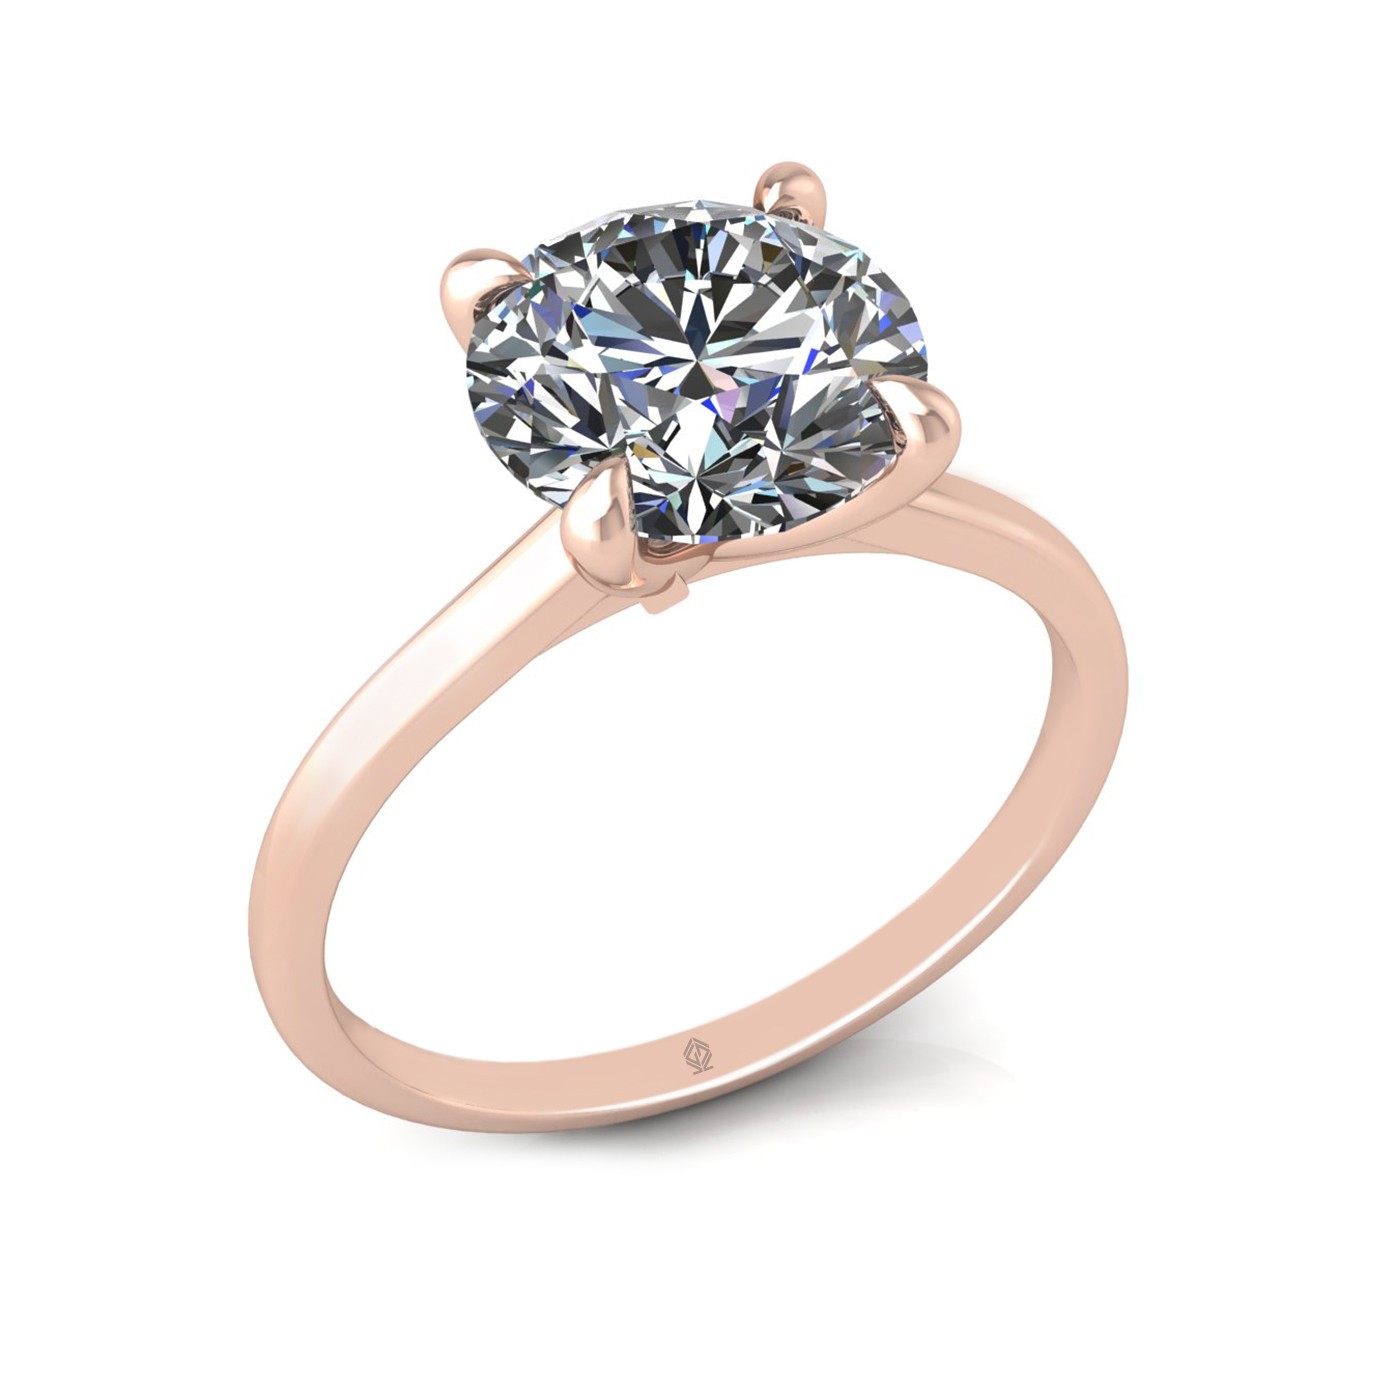 18k rose gold 2.5 ct 4 prongs solitaire round cut diamond engagement ring with whisper thin band